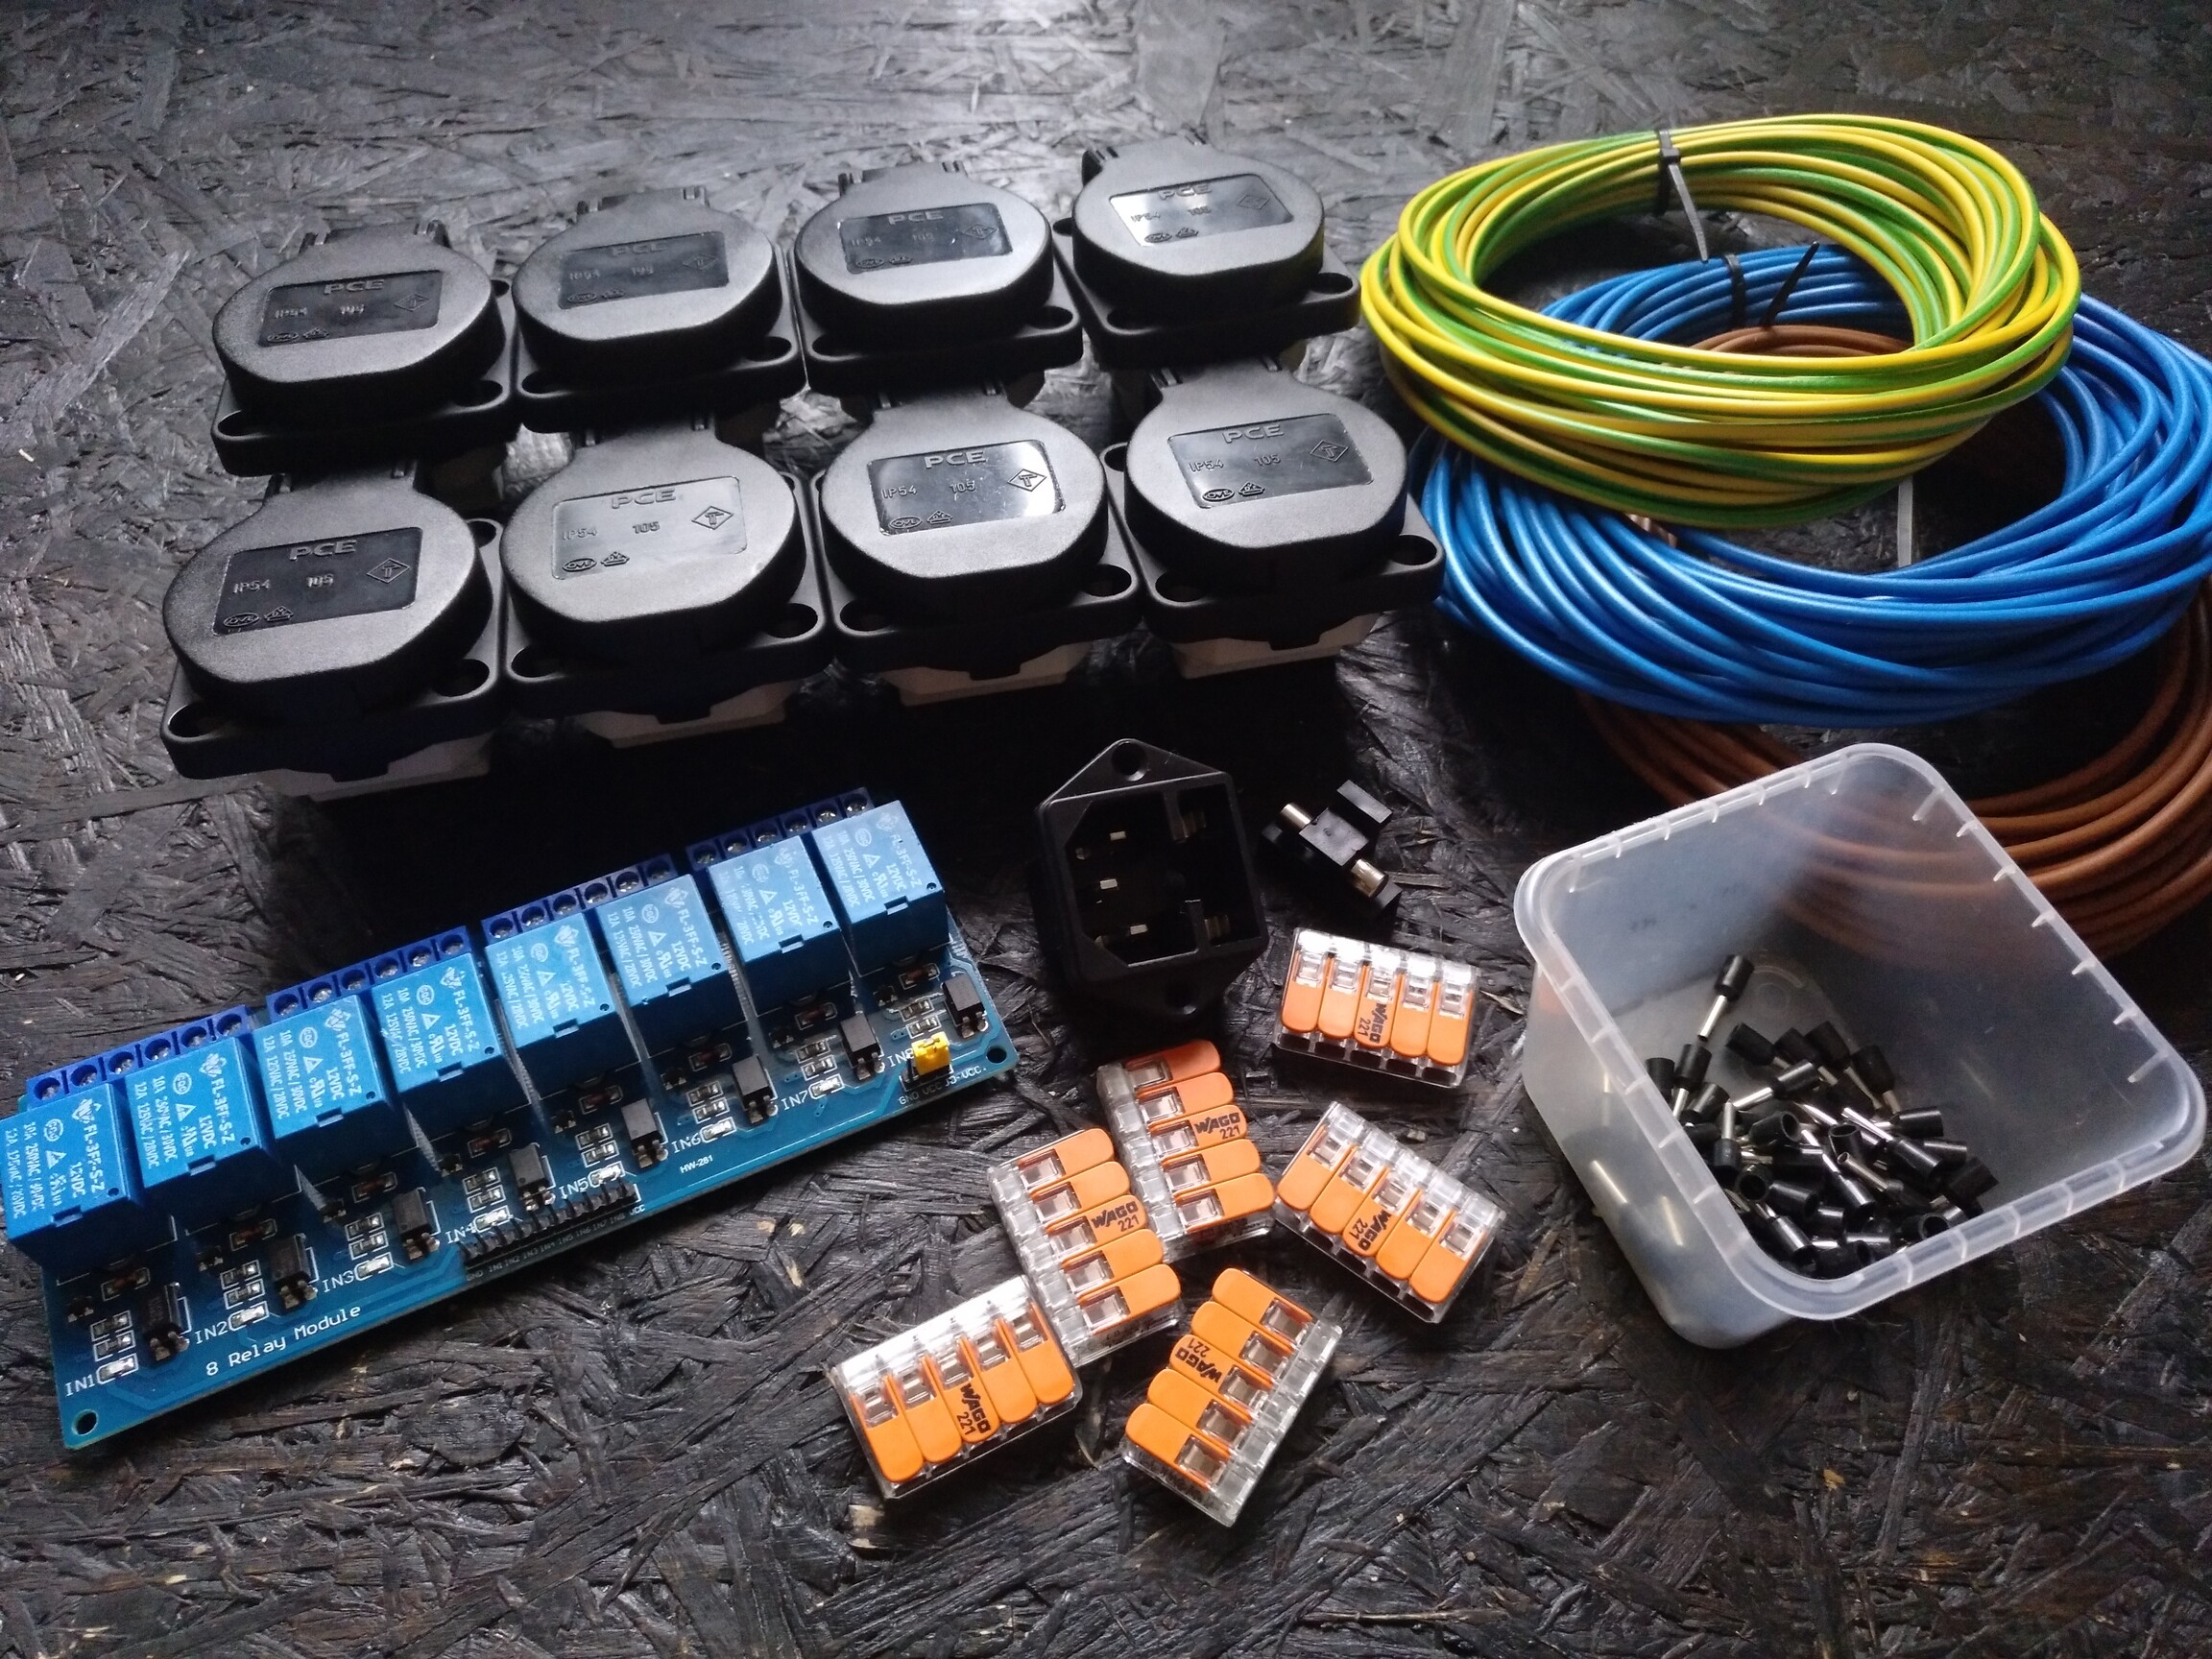 electrical components for the "high voltage" side